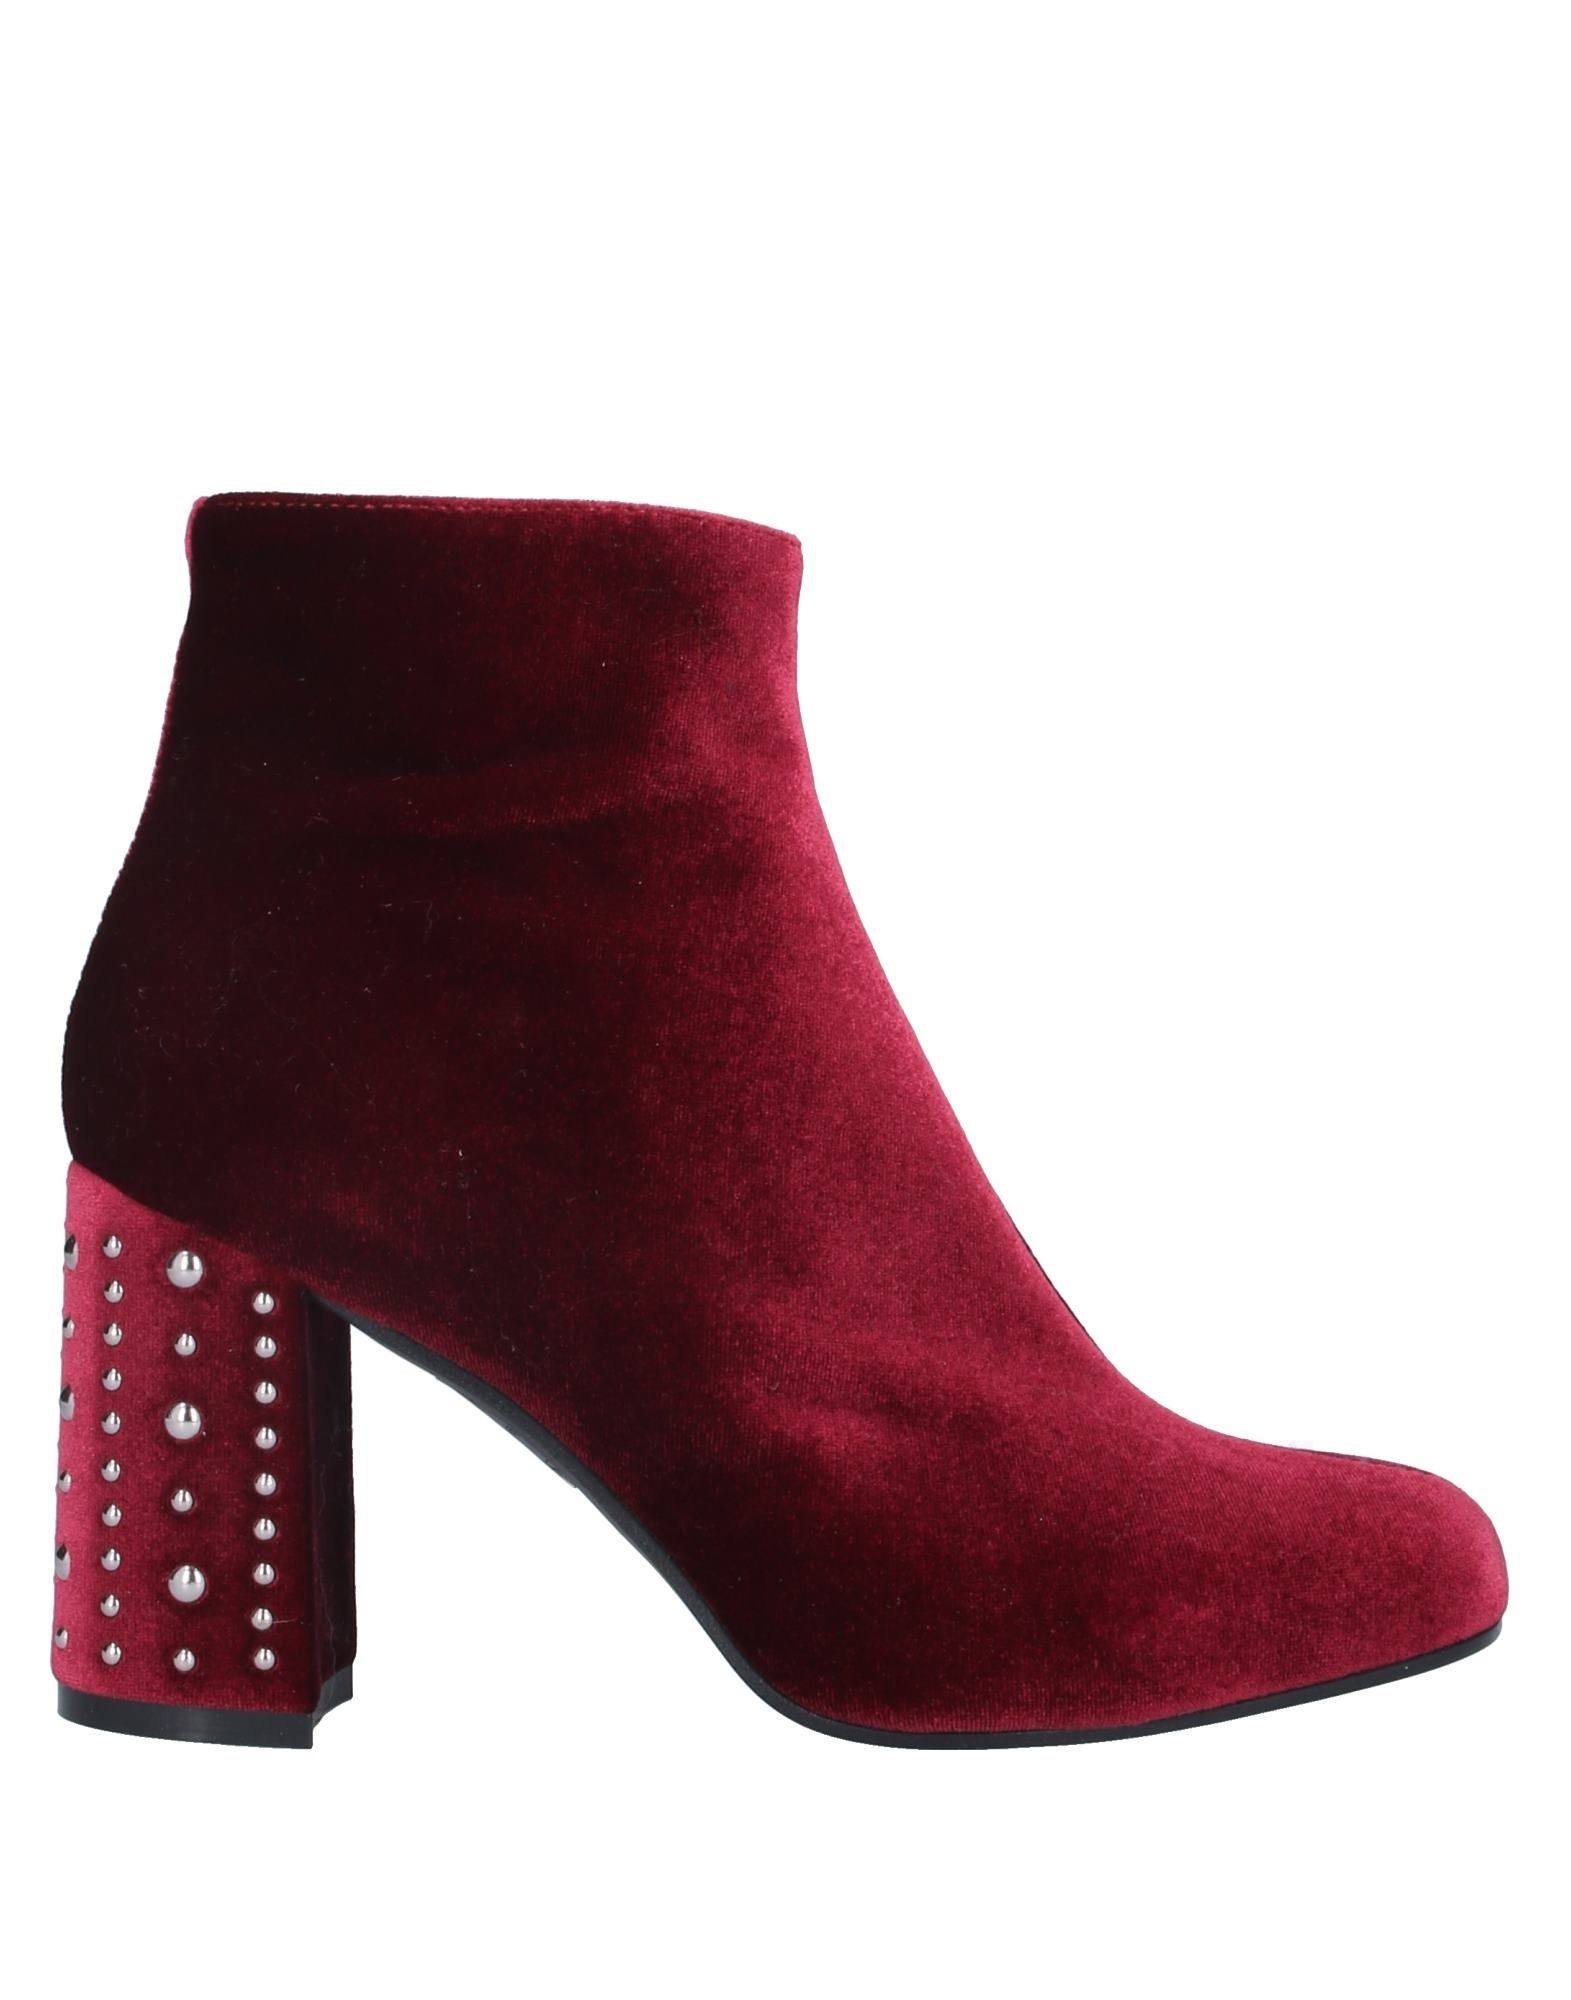 Beatrice B Beatrice.b Ankle Boots In Maroon